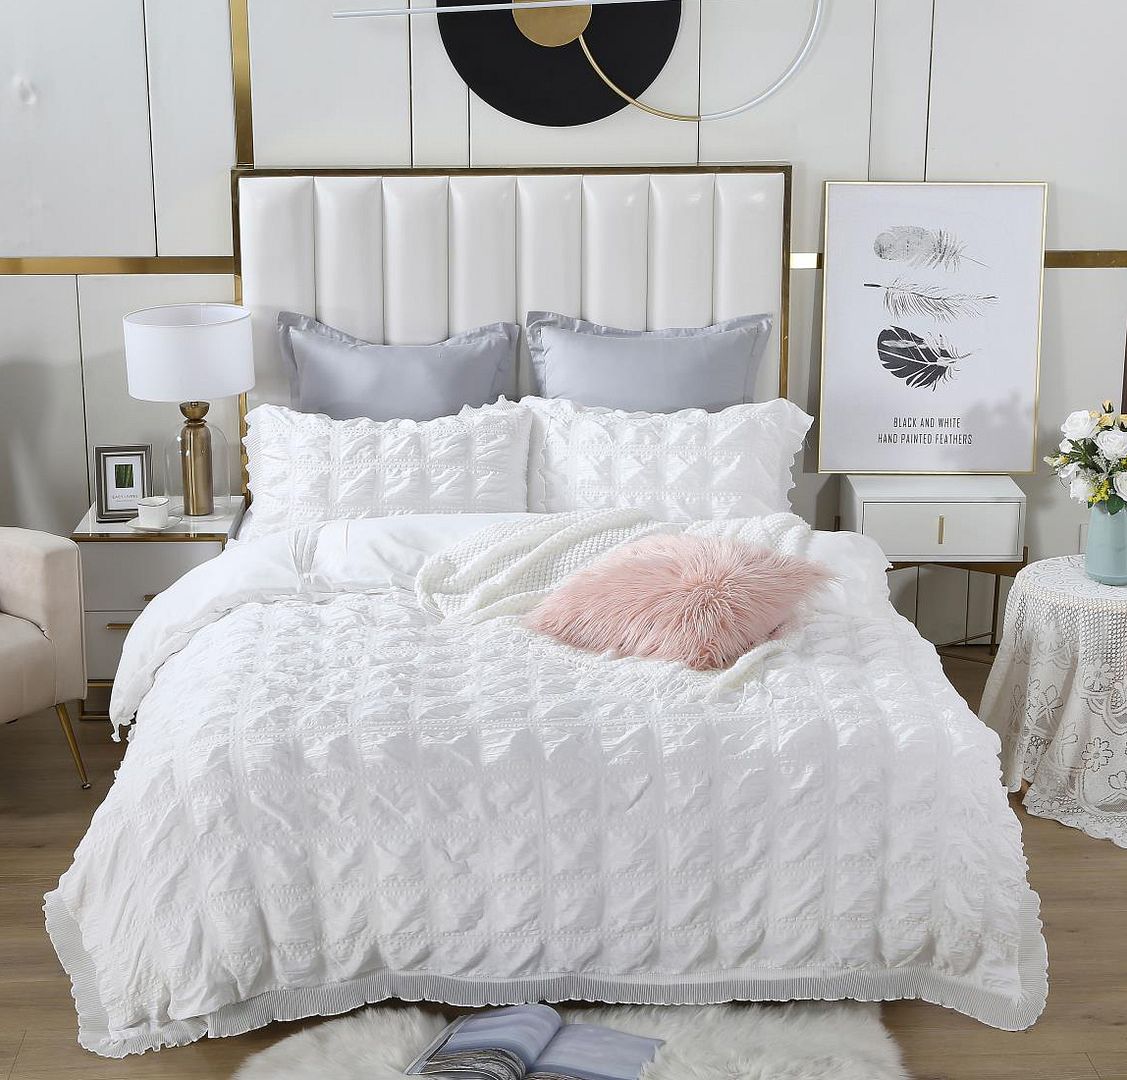 Ruffles Textured Jacquard Quilt Cover Set -Queen/King/Super King Size- white